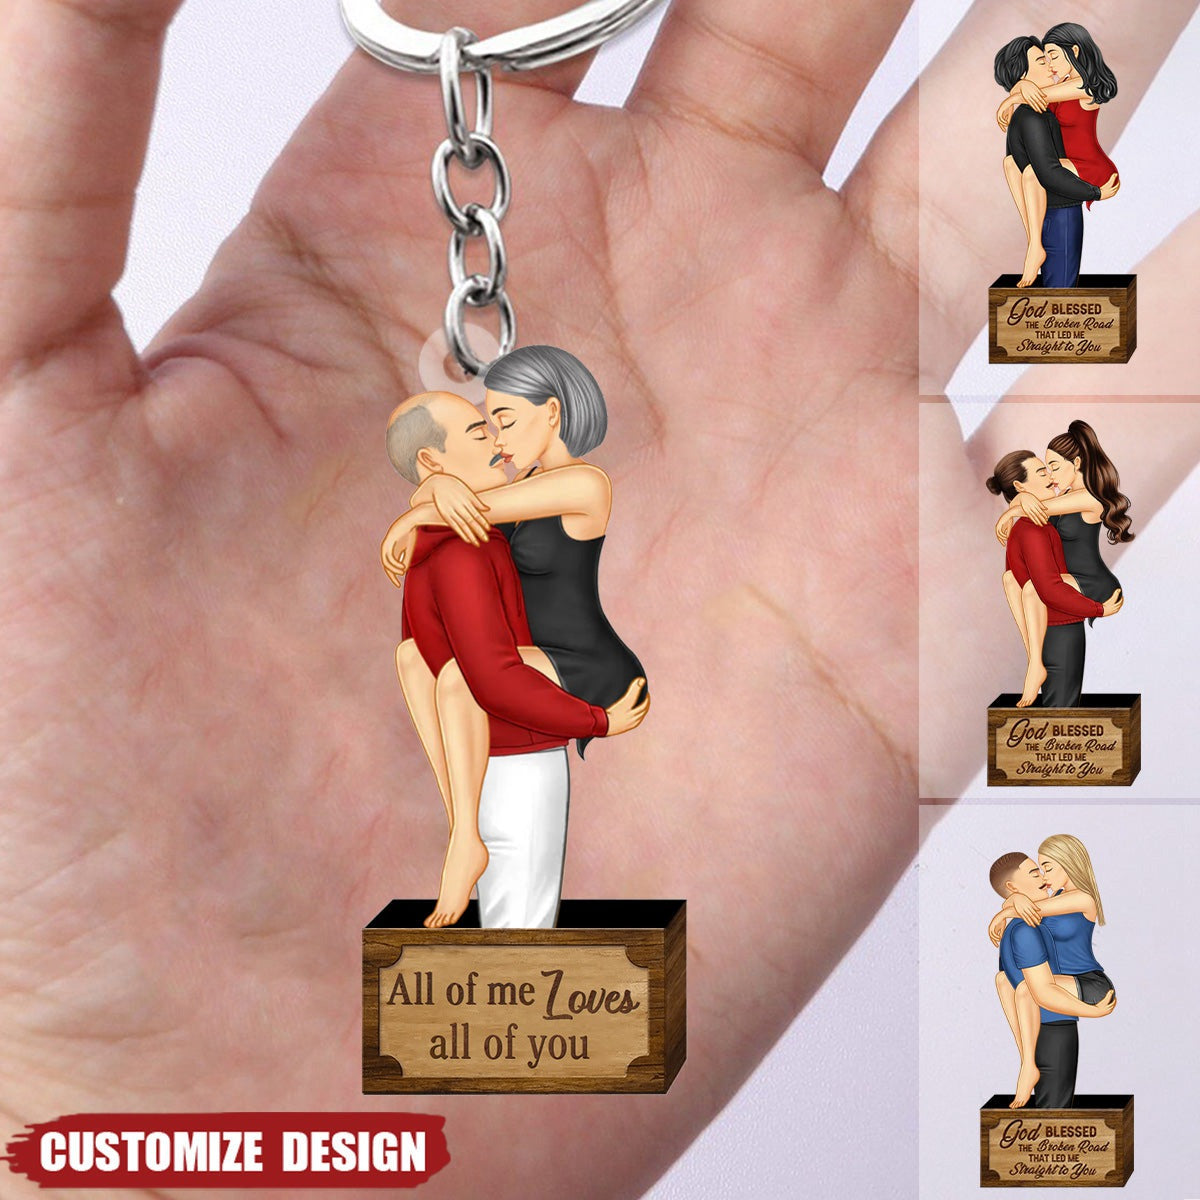 God Blessed - Romantic Personalized Couple Kissing Hugging Keychain - Gift For Couple